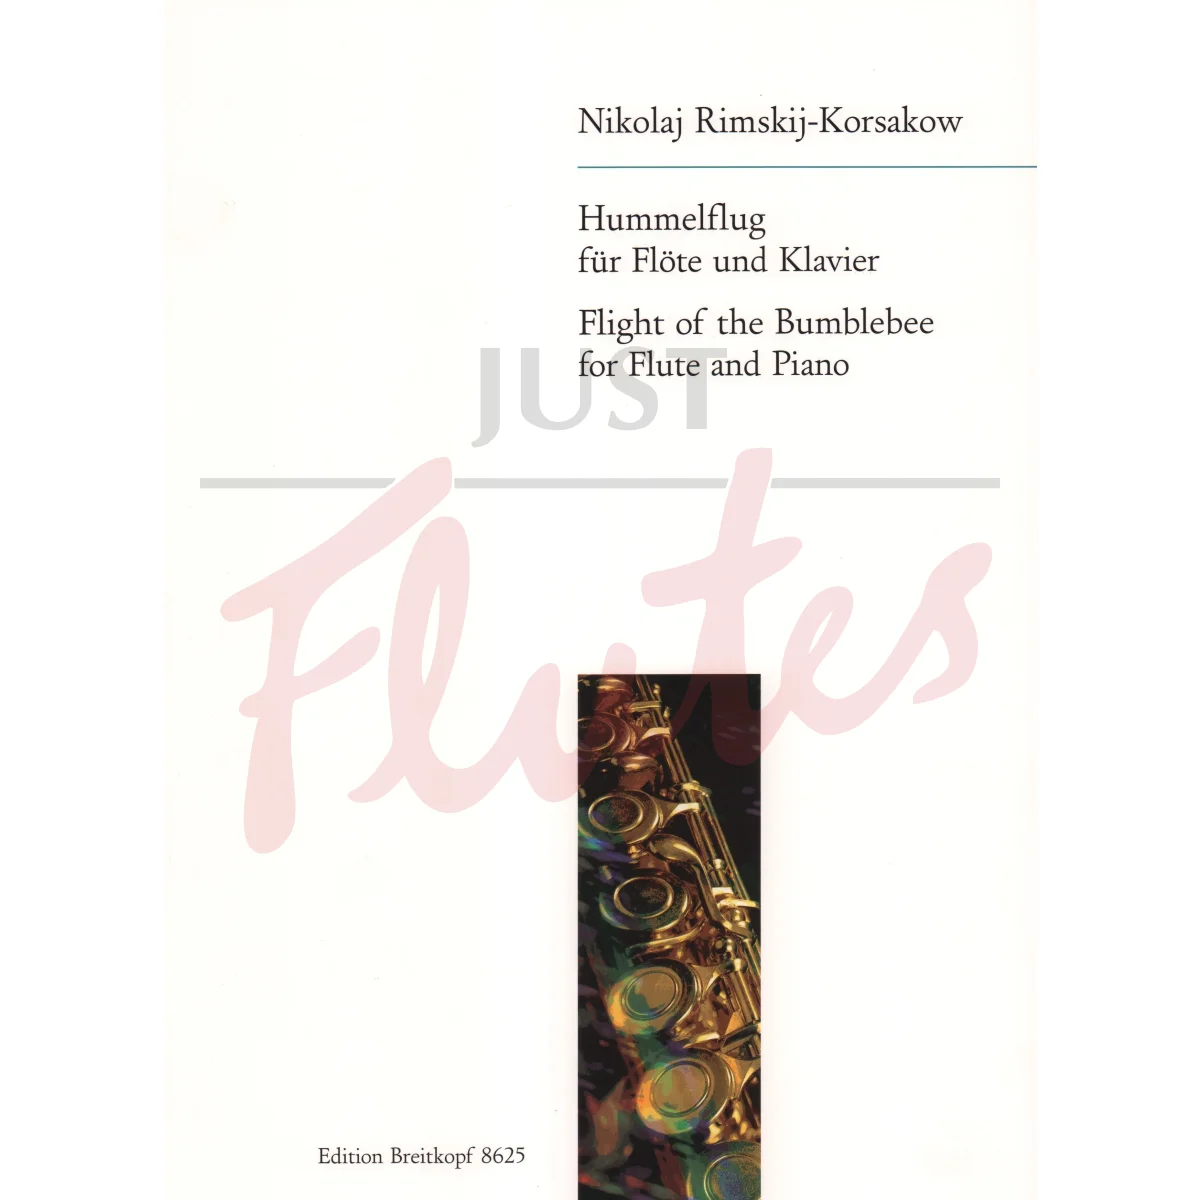 Flight of the Bumblebee for Flute and Piano